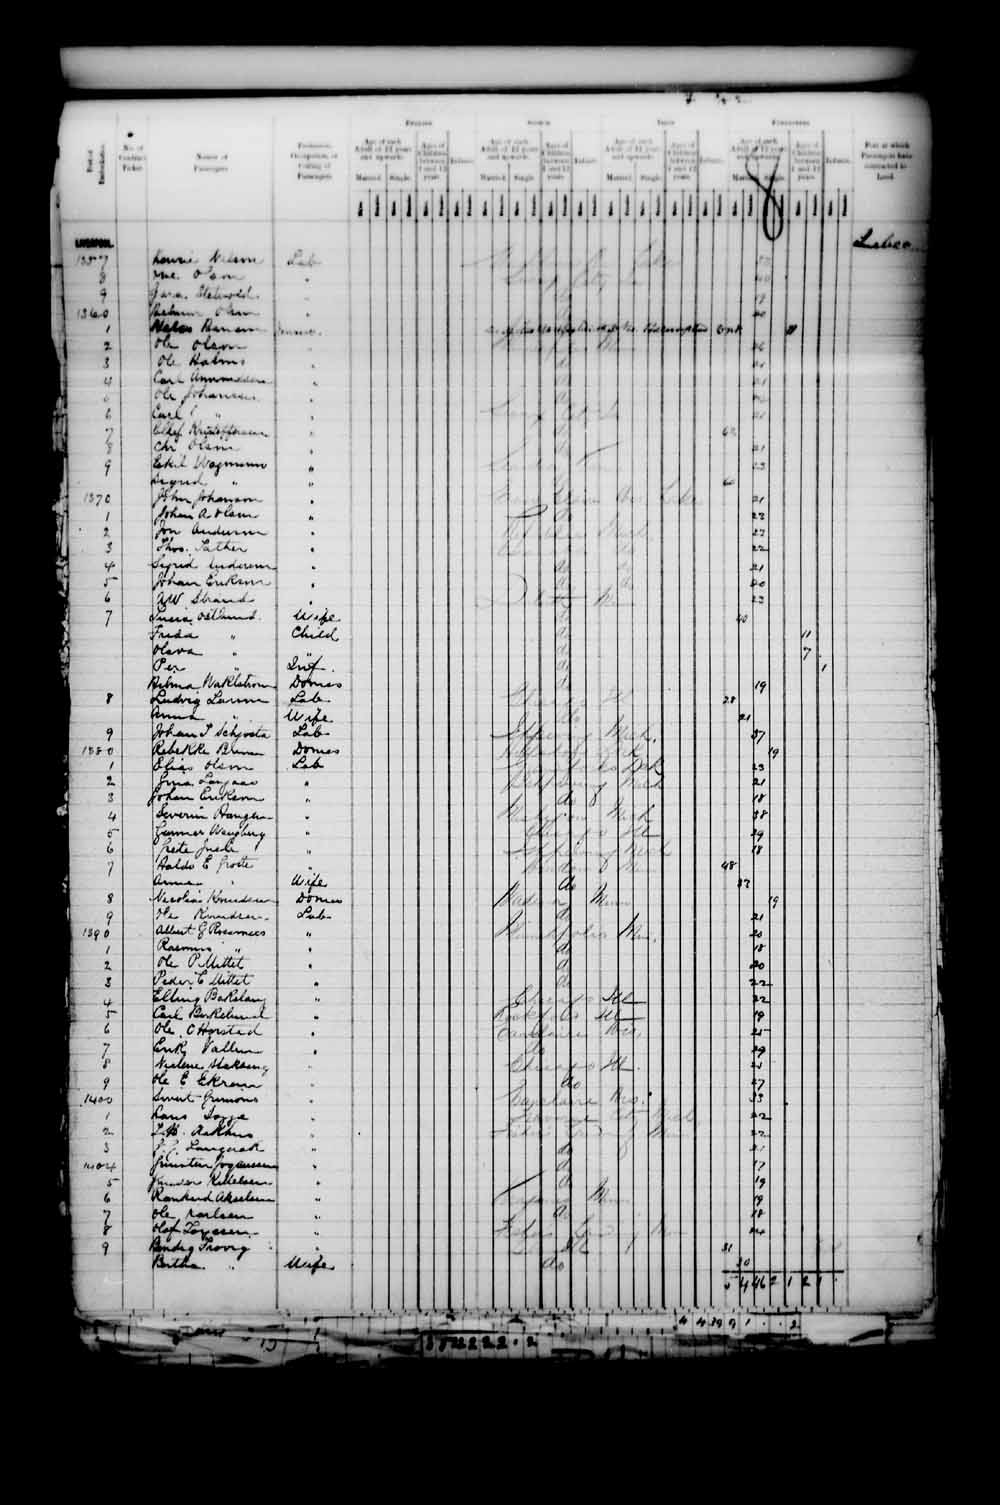 Digitized page of Quebec Passenger Lists for Image No.: e003546735